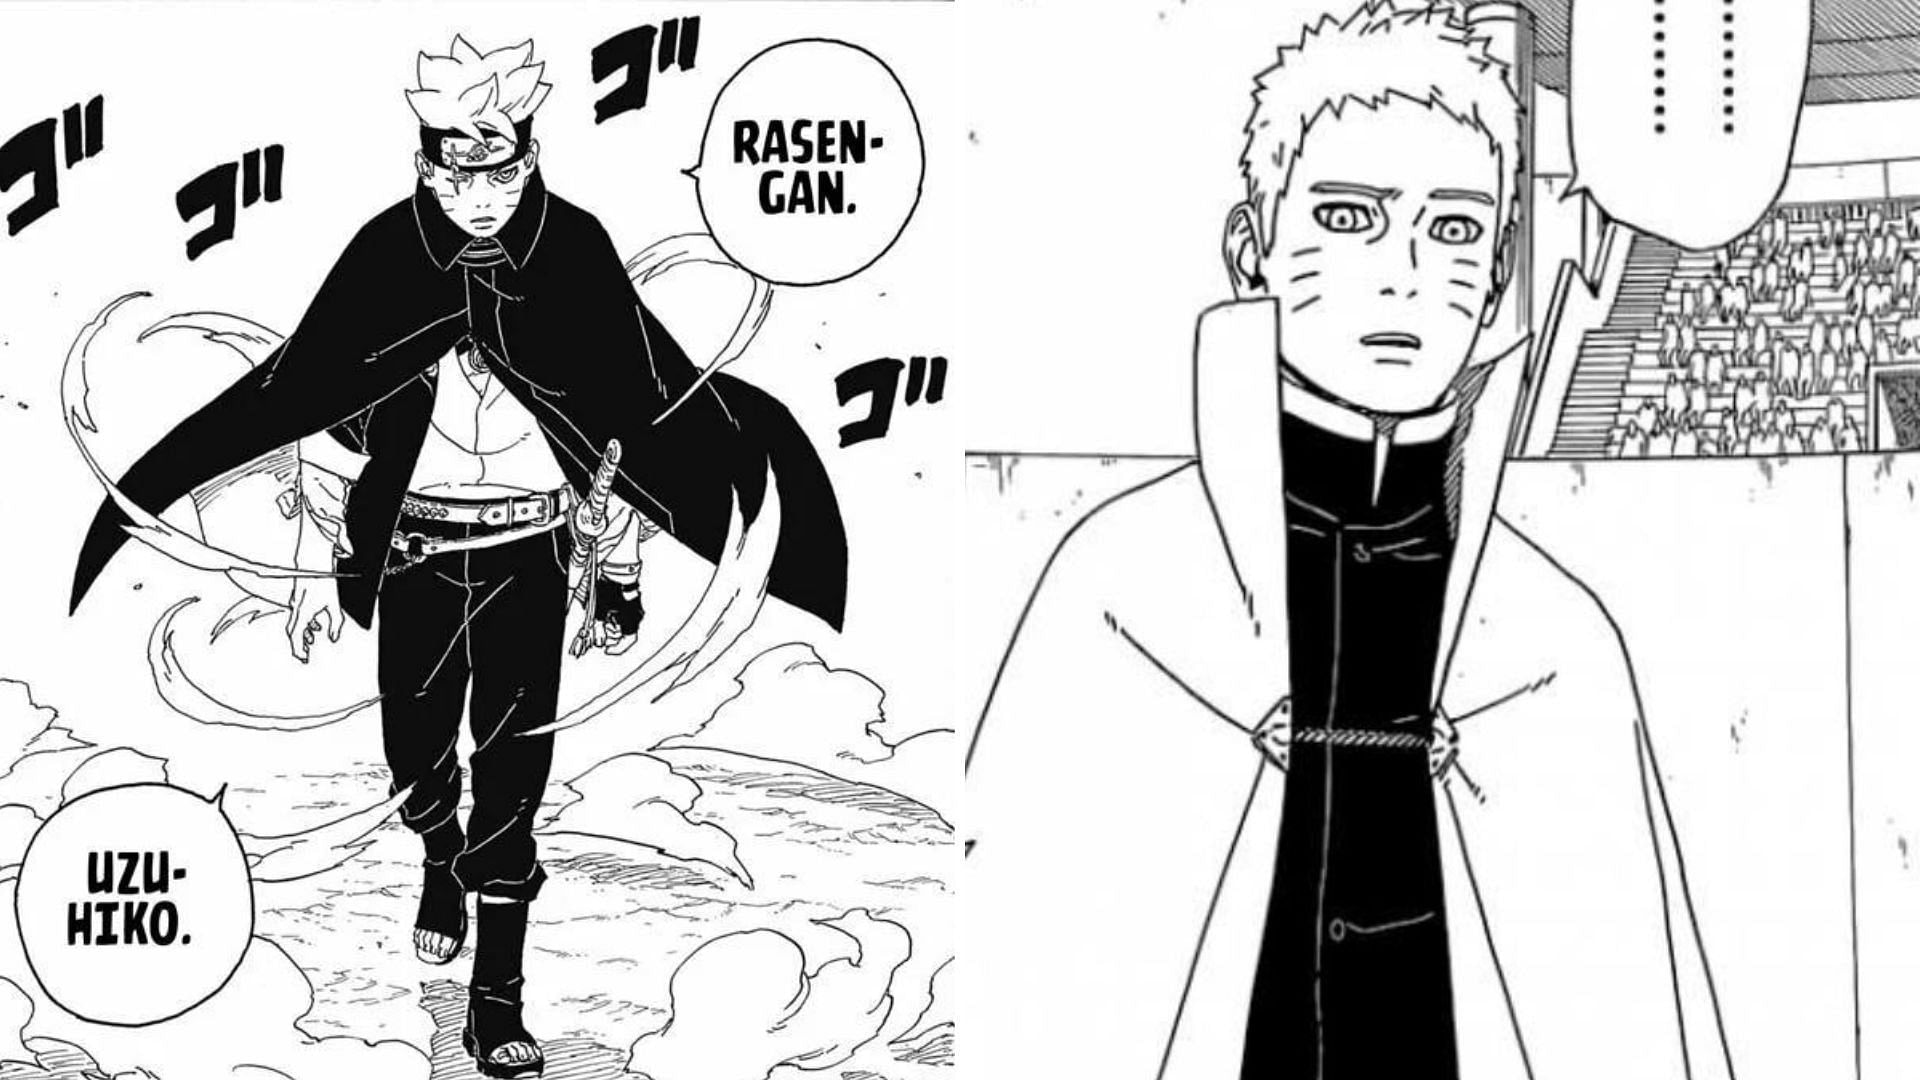 Boruto has officially surpassed Naruto, and the latest chapter confirms it